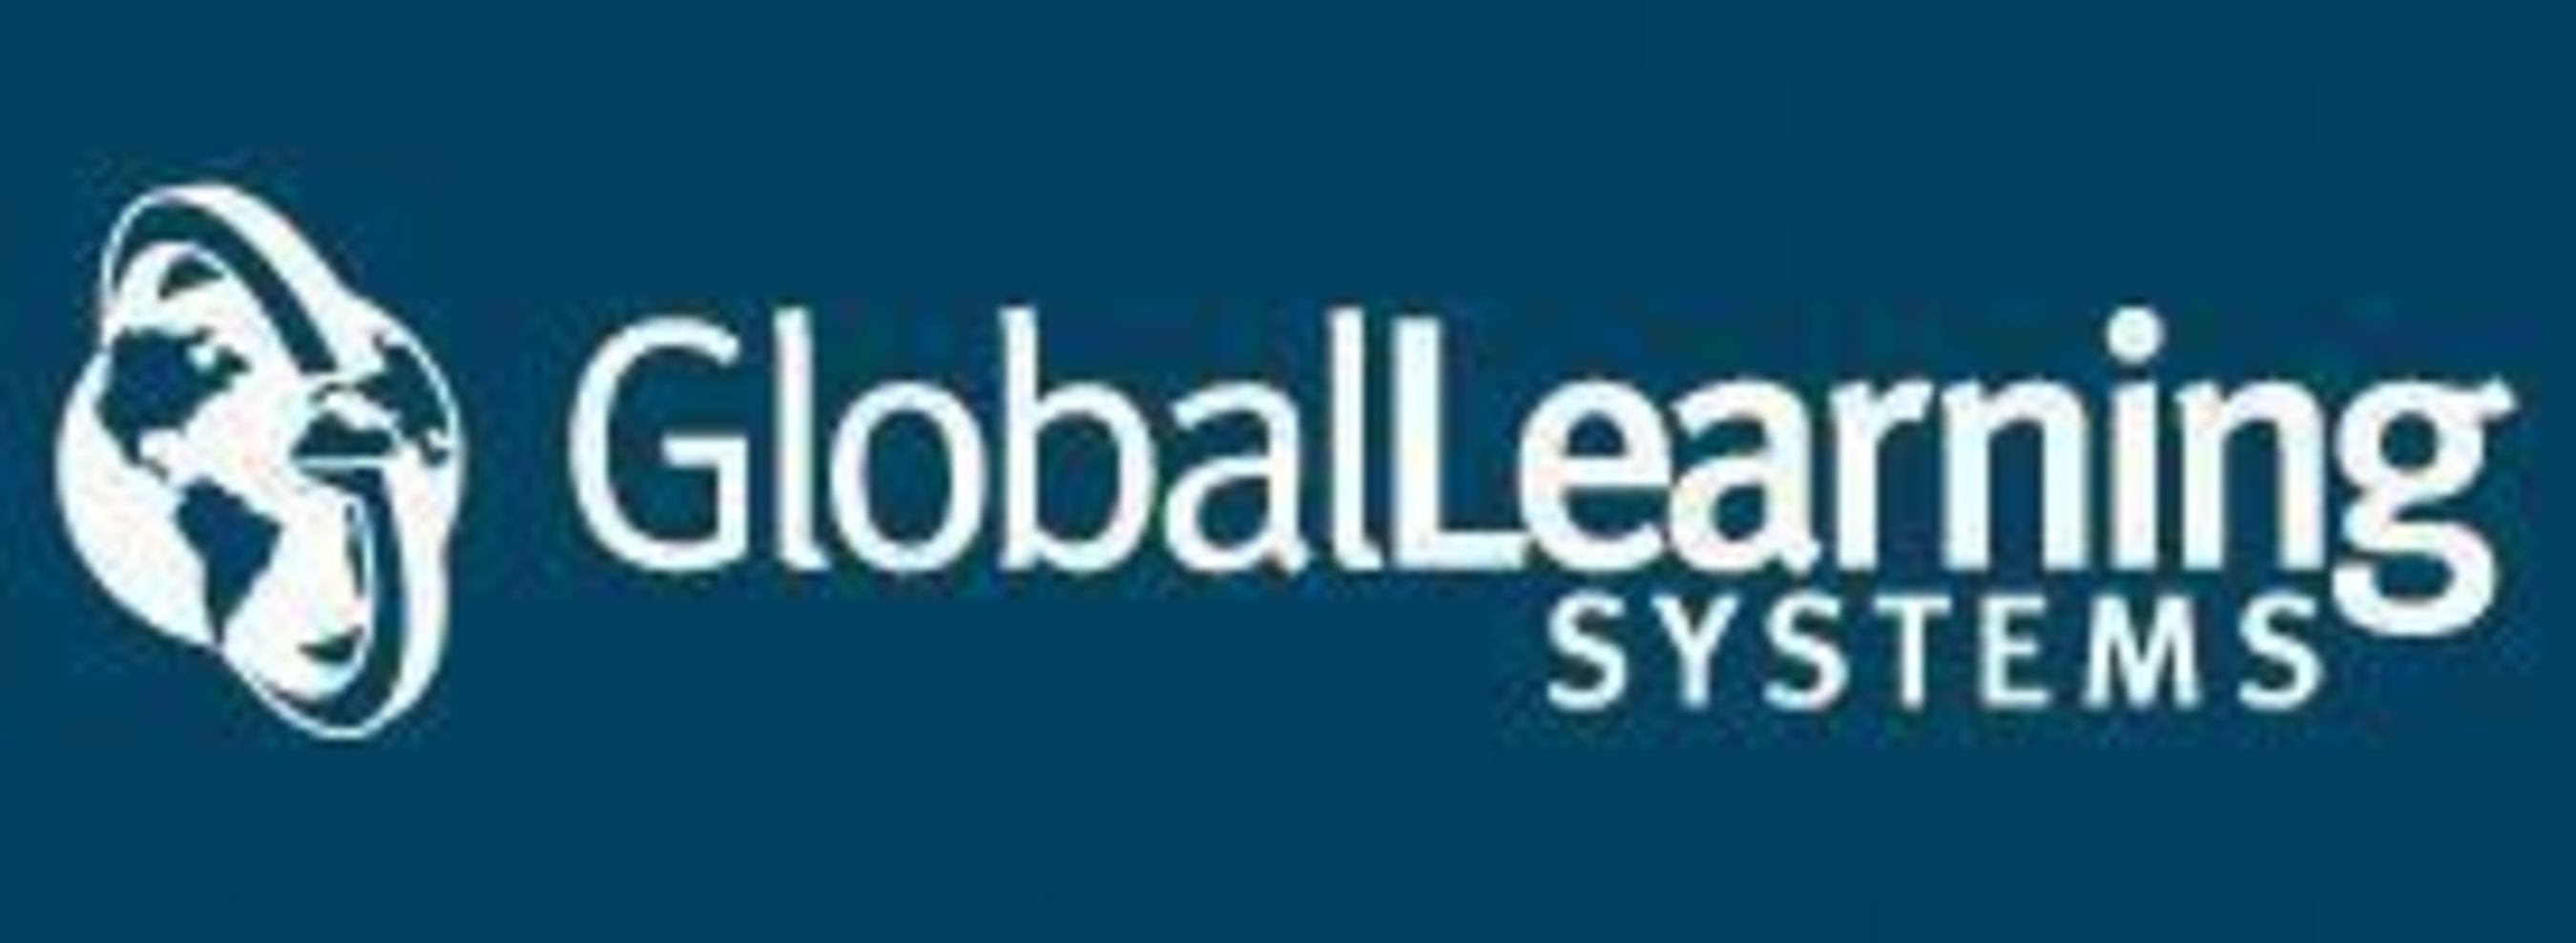 Global Learning Systems (PRNewsFoto/Global Learning Systems)